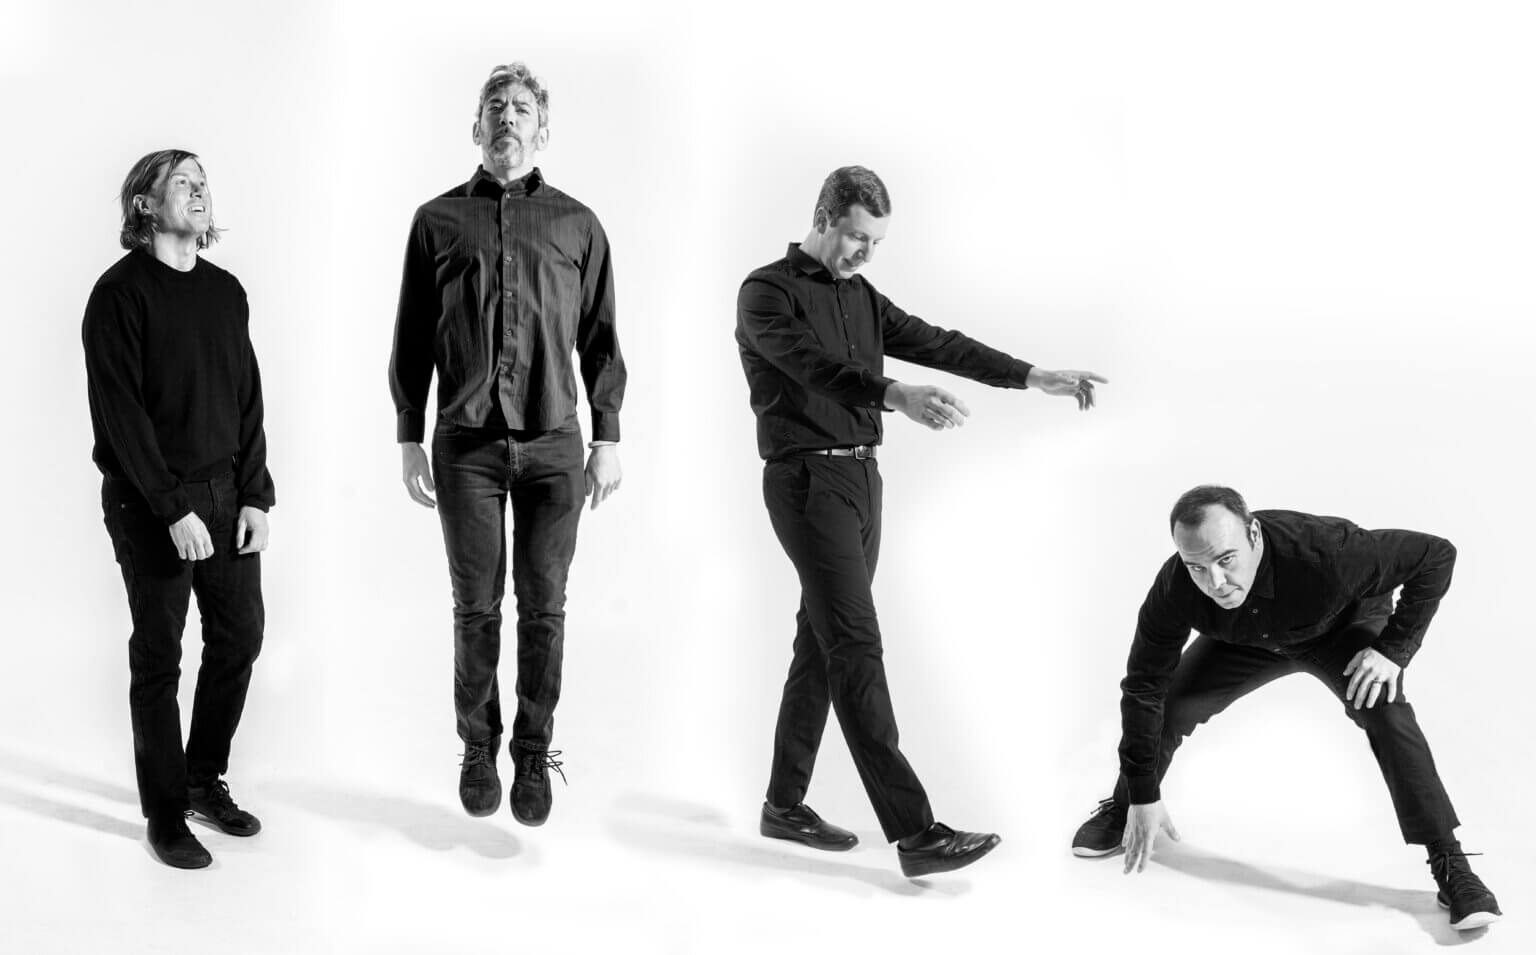 Future Islands Debut new single "King Of Sweden." The track is now available via 4AD and streaming services